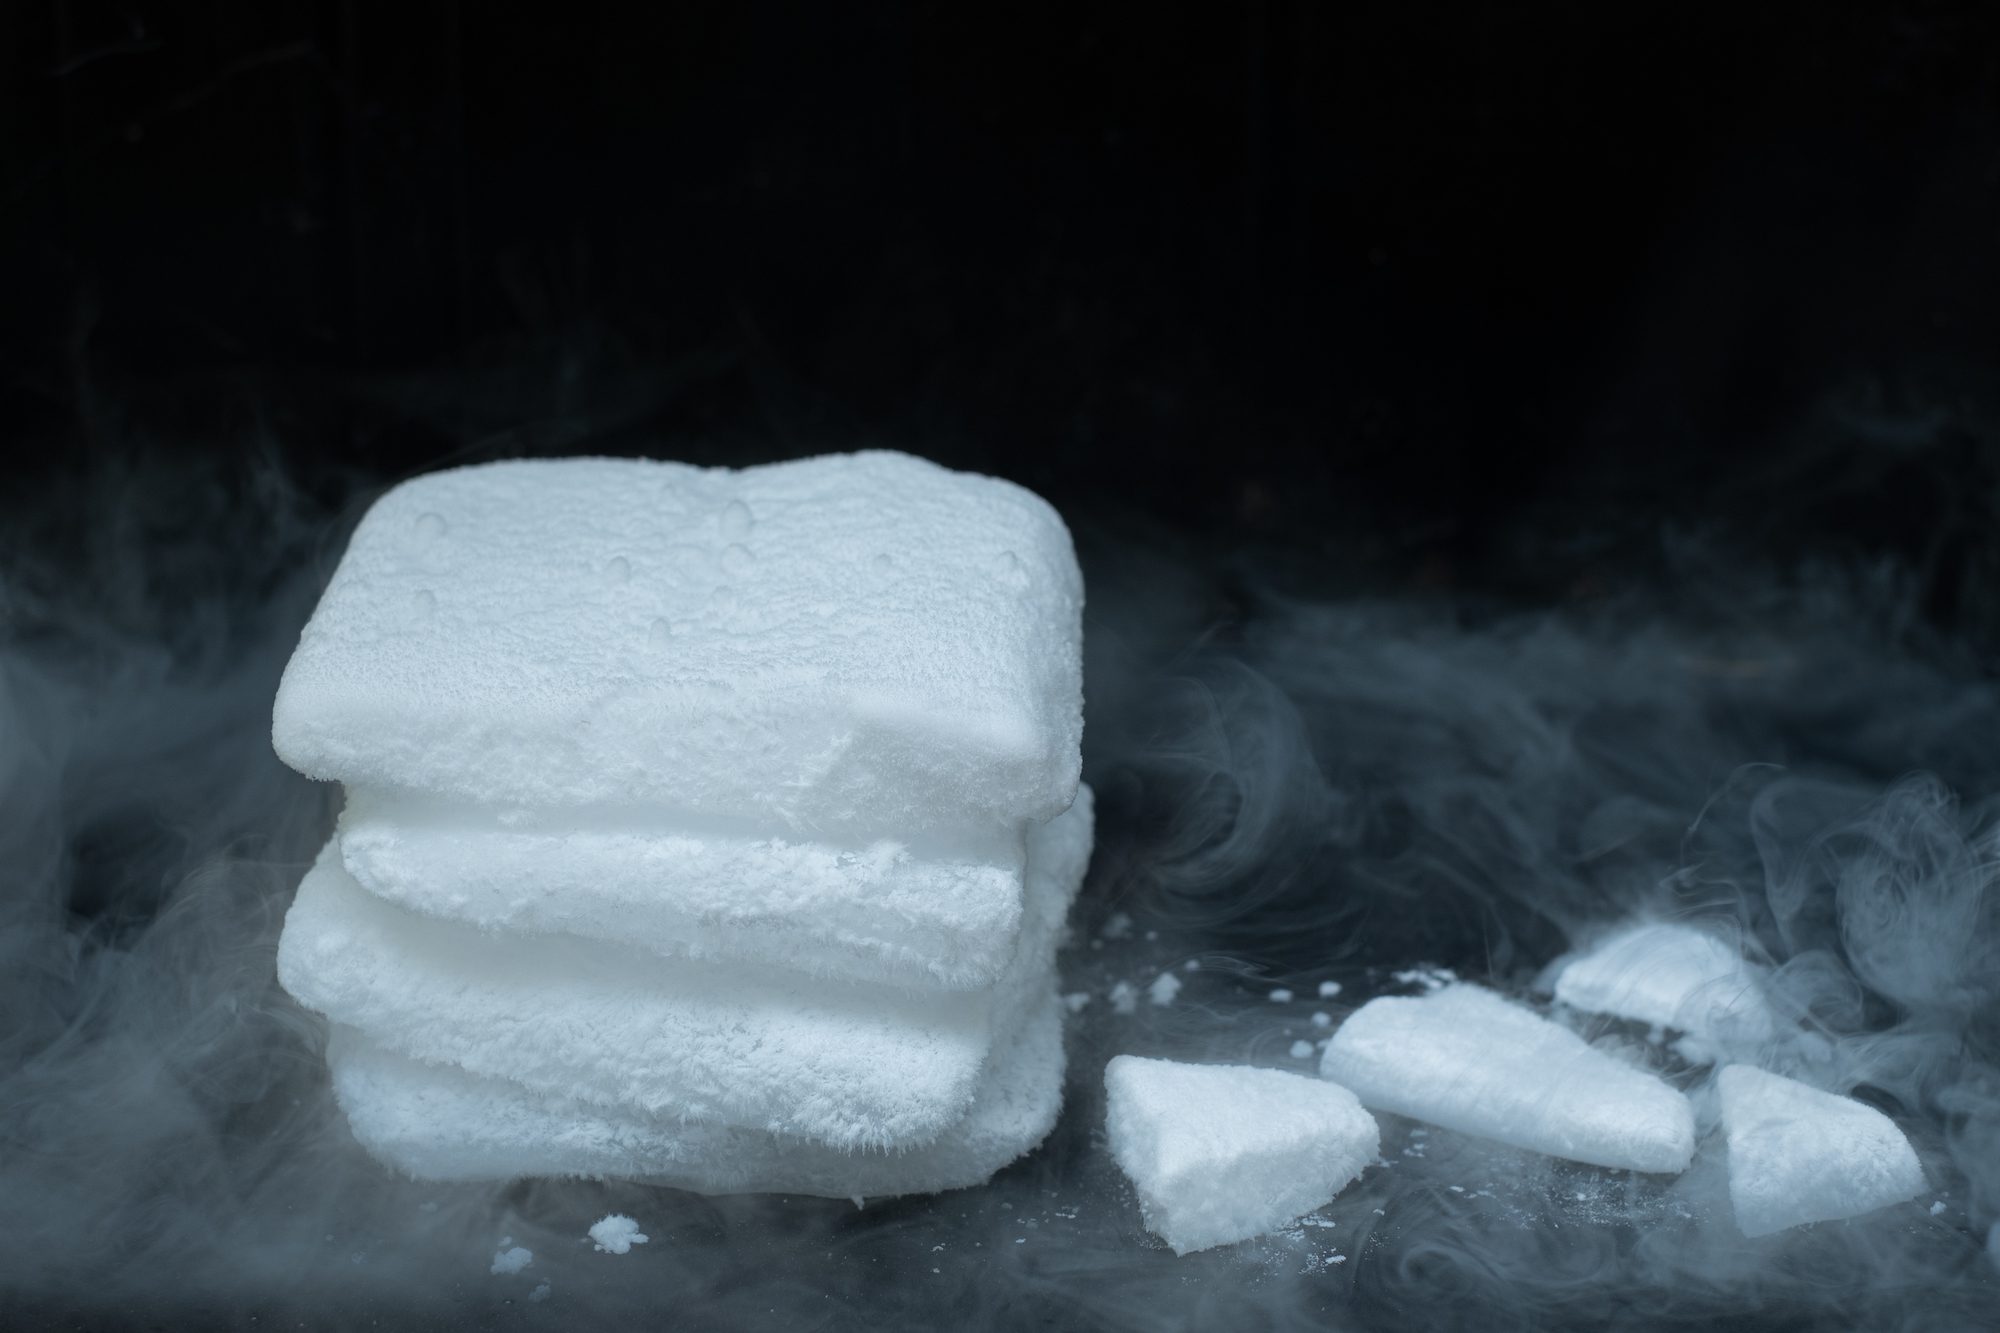 Dry Ice, a solid form of carbon dioxide